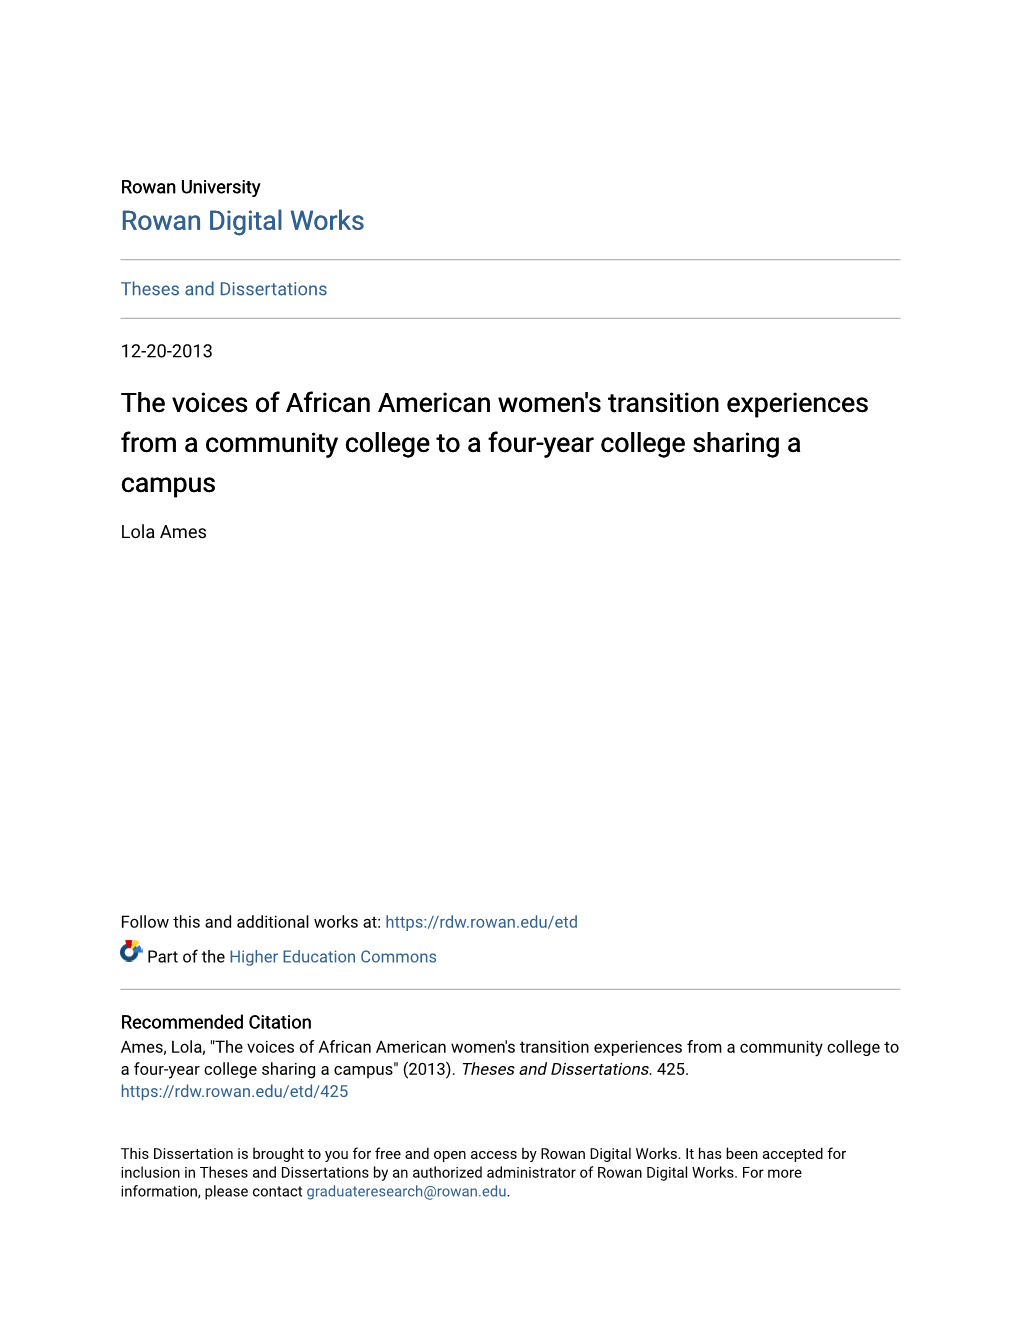 The Voices of African American Women's Transition Experiences from a Community College to a Four-Year College Sharing a Campus